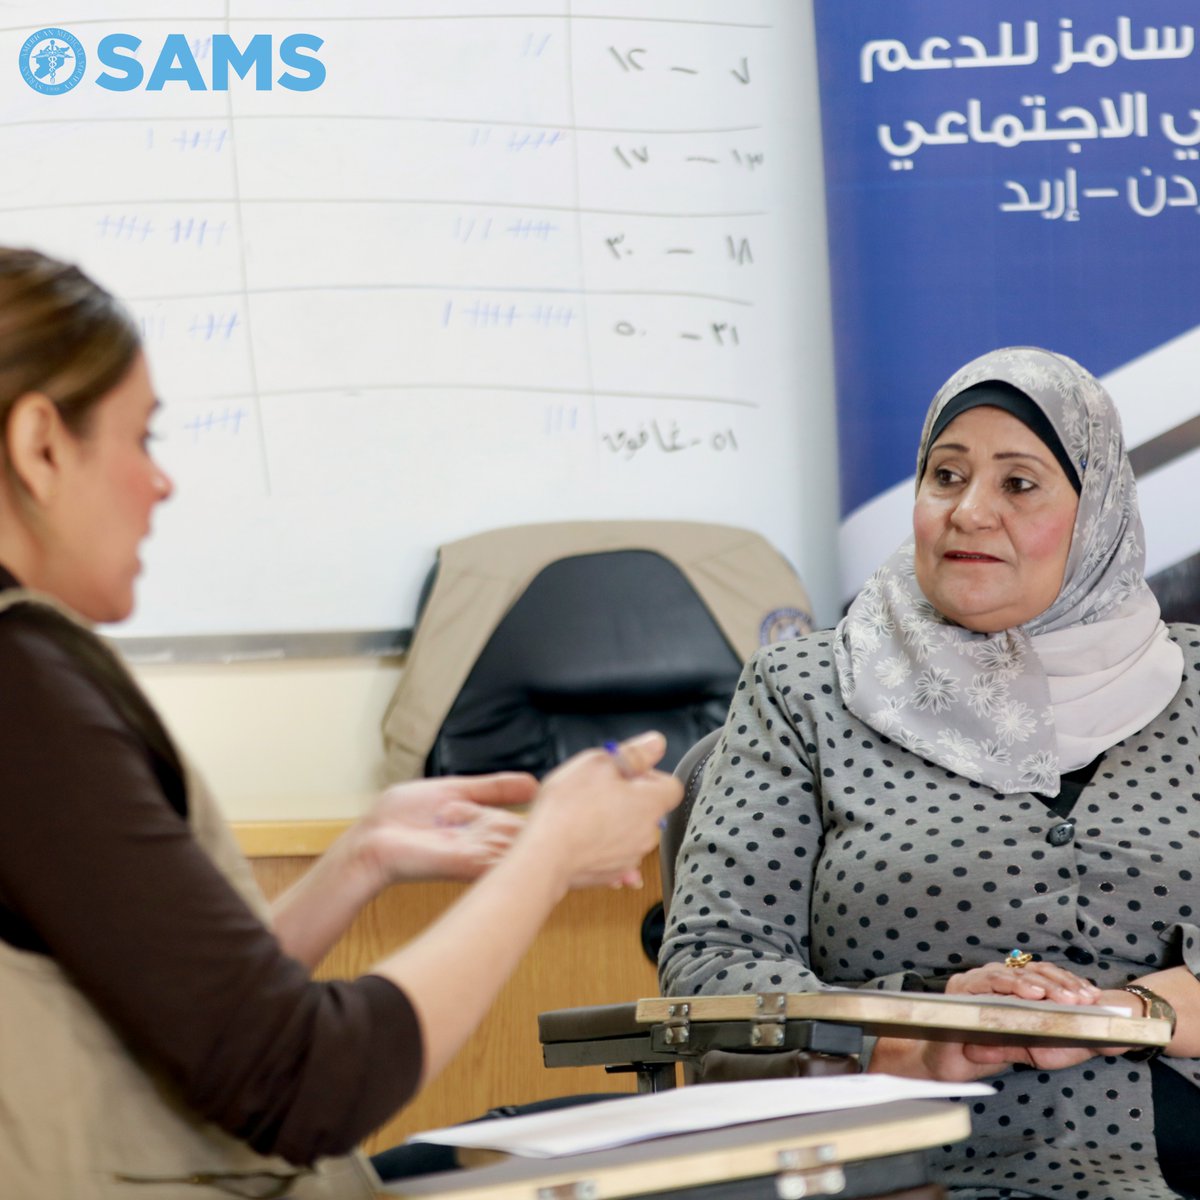 #SAMS' Parenting Skills program in #Jordan tackles challenges & emphasizes communication & self-esteem. It saw promising signs from women like Sahar, a 59-year-old mother of six, who used the skills to aid her blind son's education, showcasing the program's impact. #MentalHealth